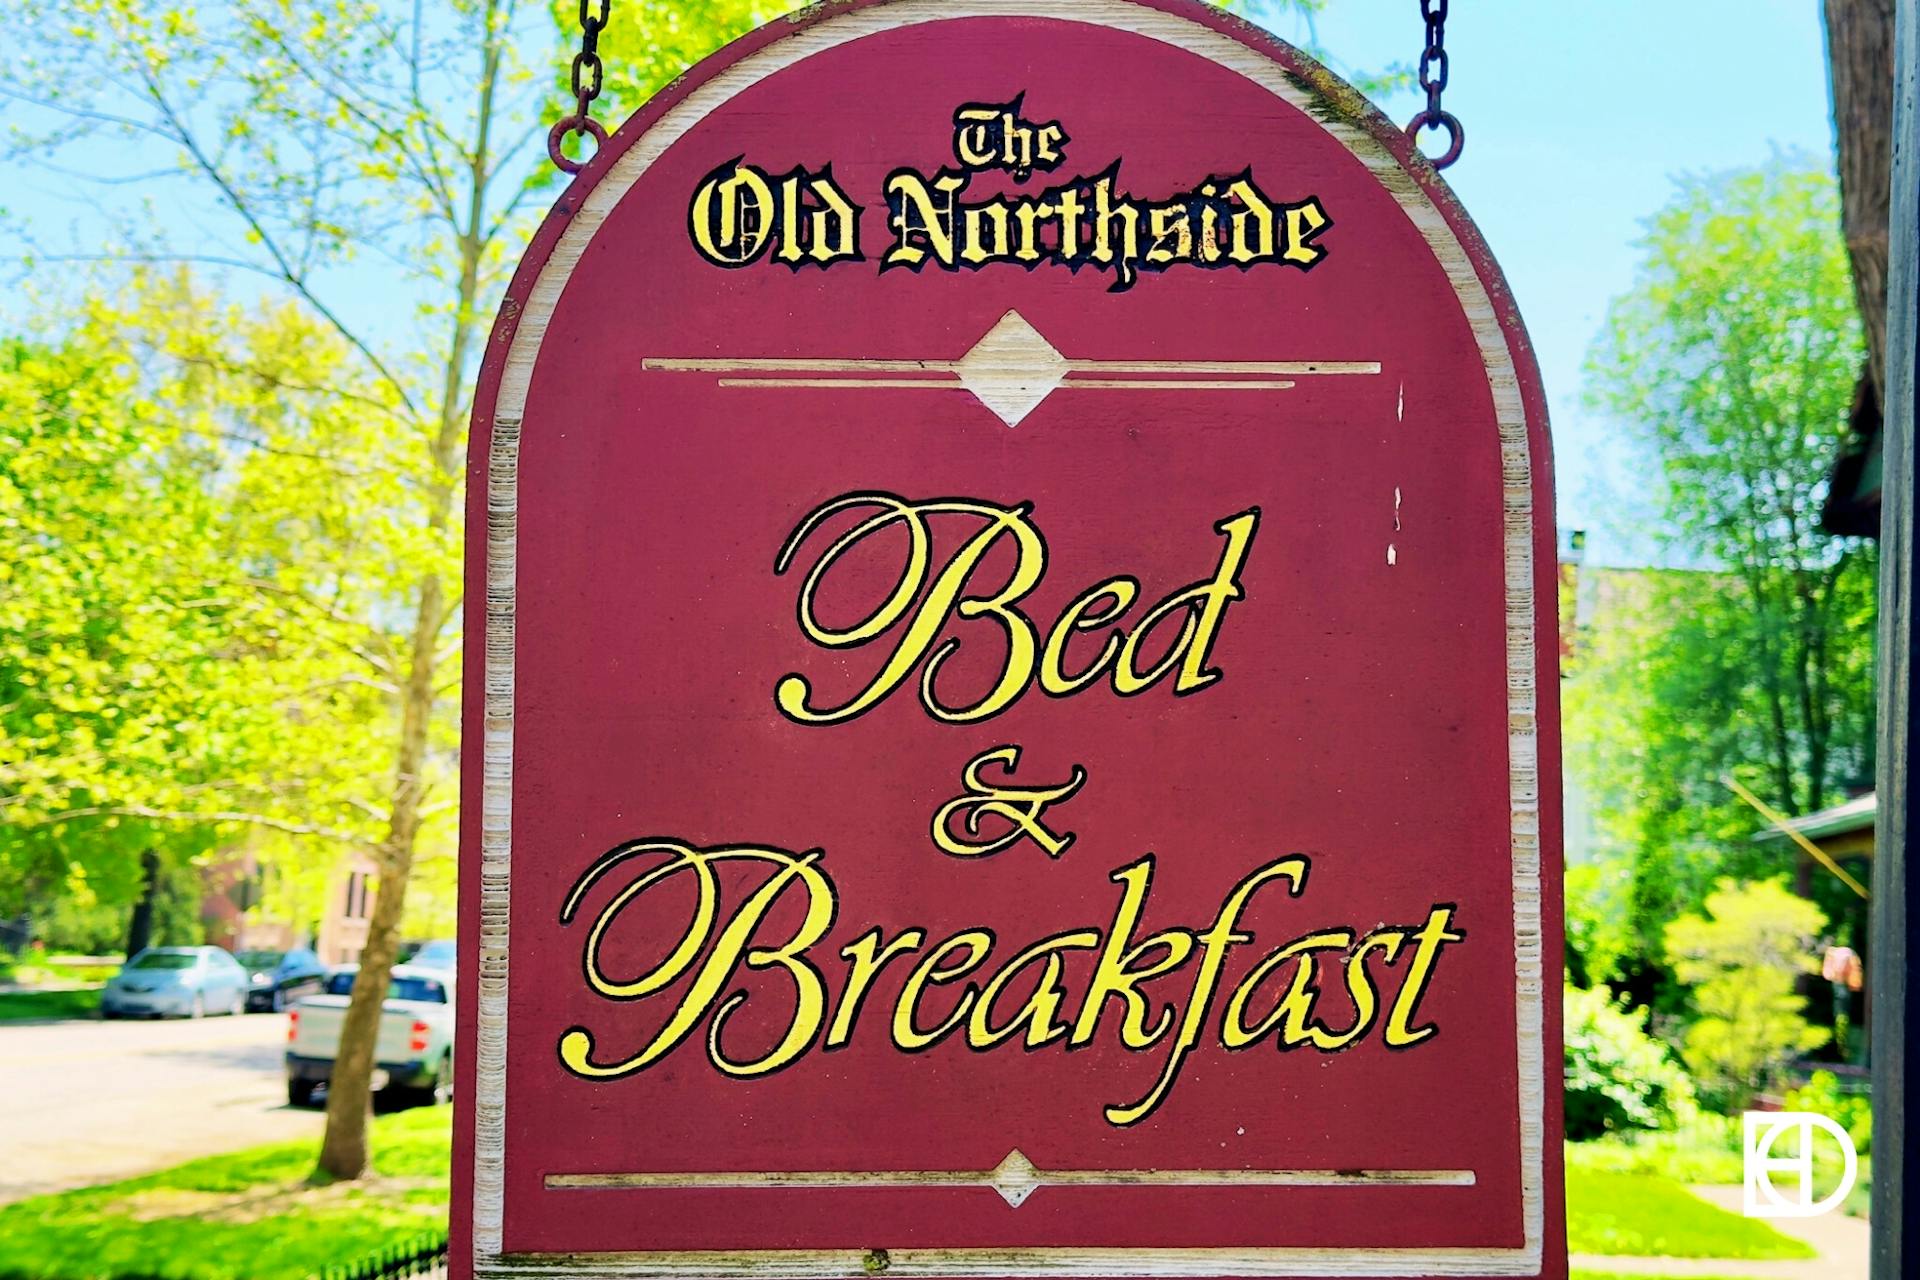 Photo of the signage of the Old Northside B&B